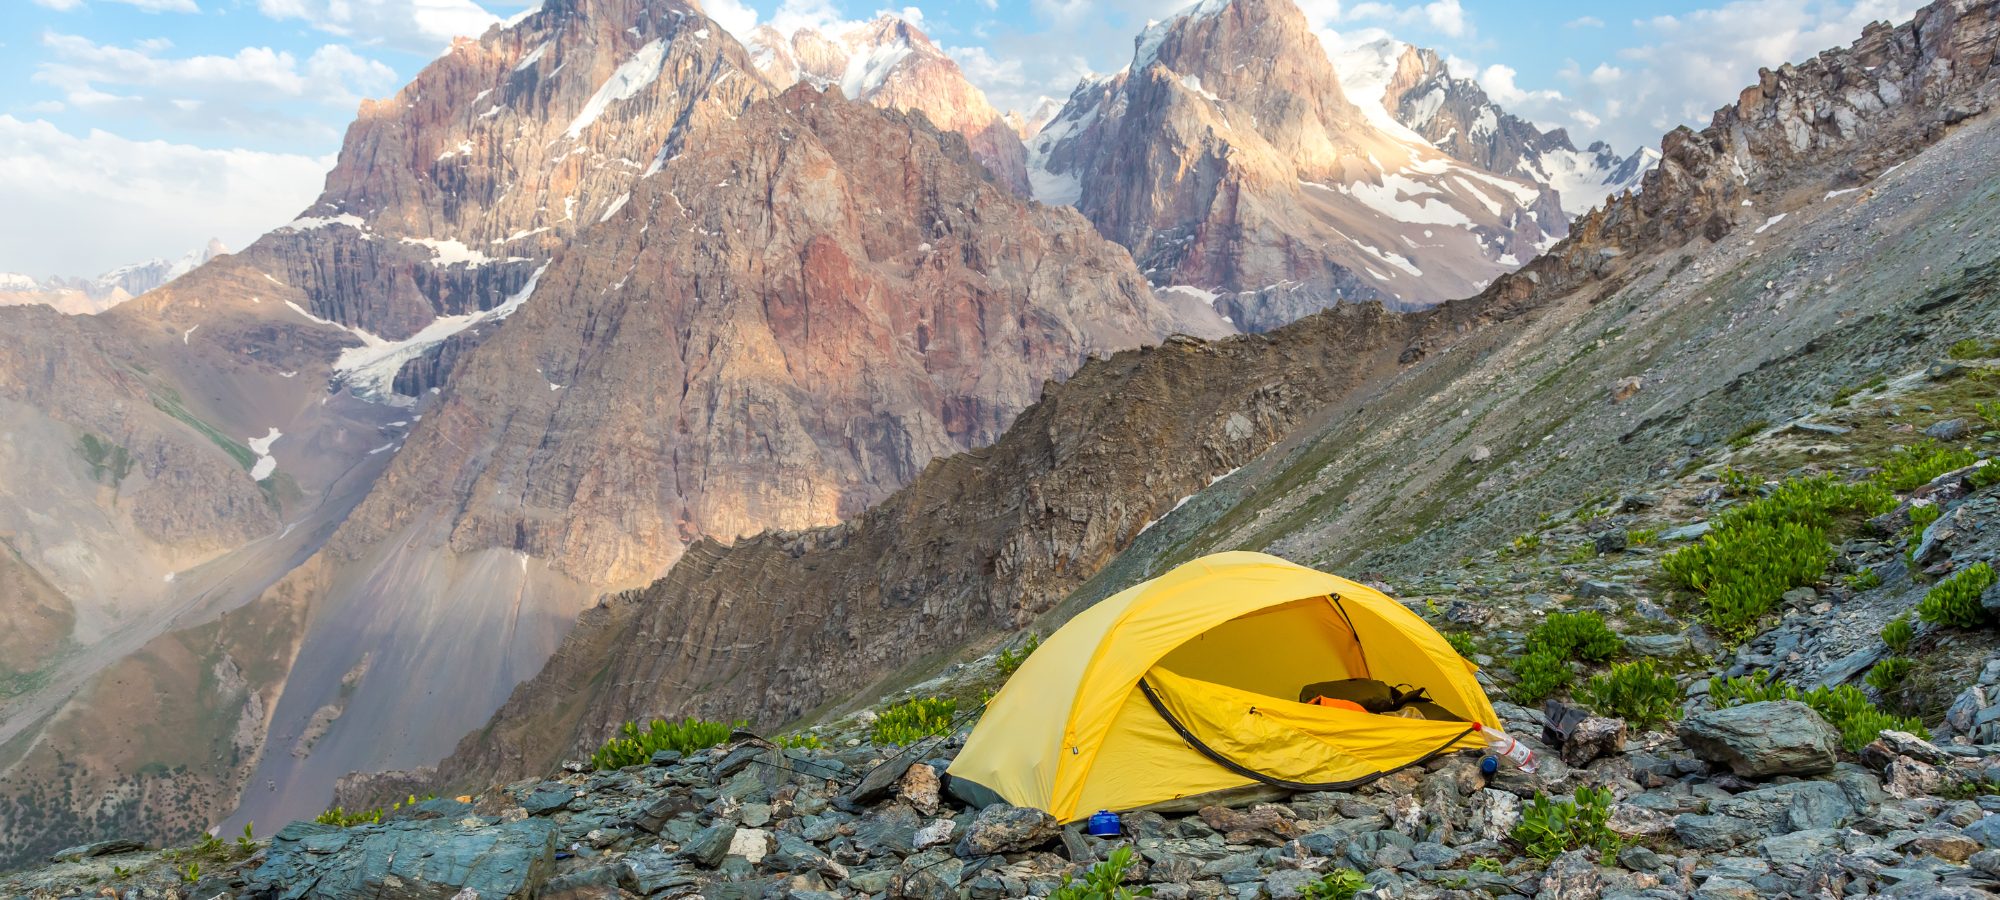 buying a tent, yellow tent on a mountainside